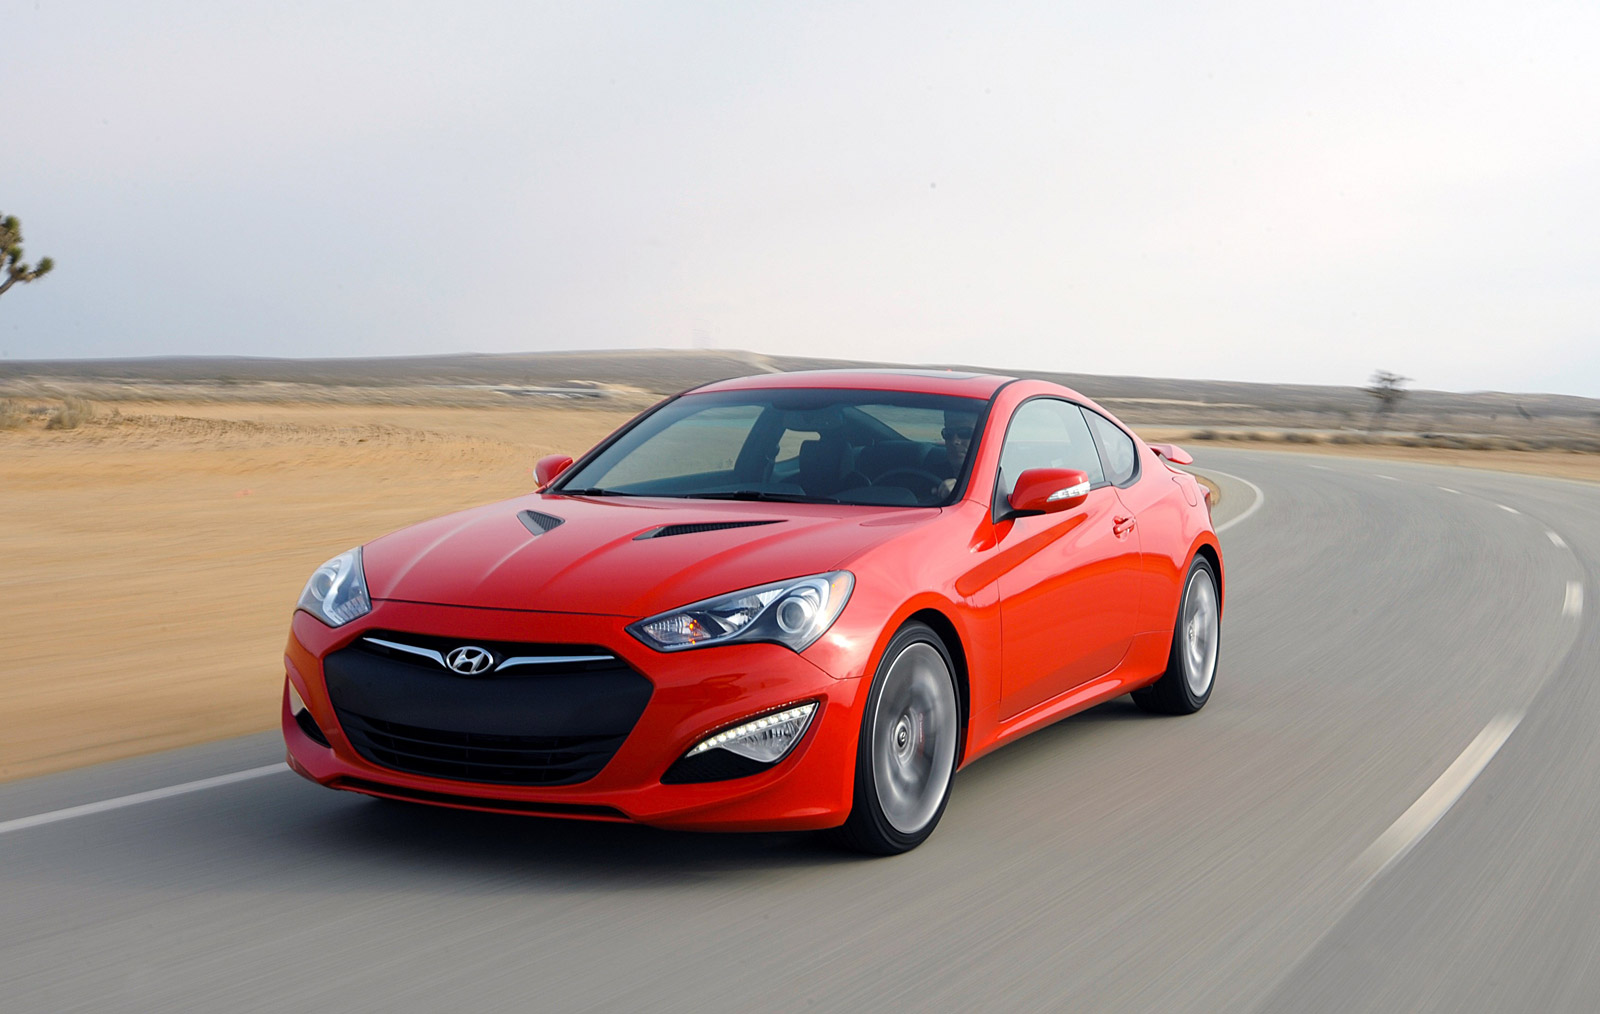 2015 Hyundai Genesis Coupe Drops Four-Cylinder, Gets $27,645 Starting Price